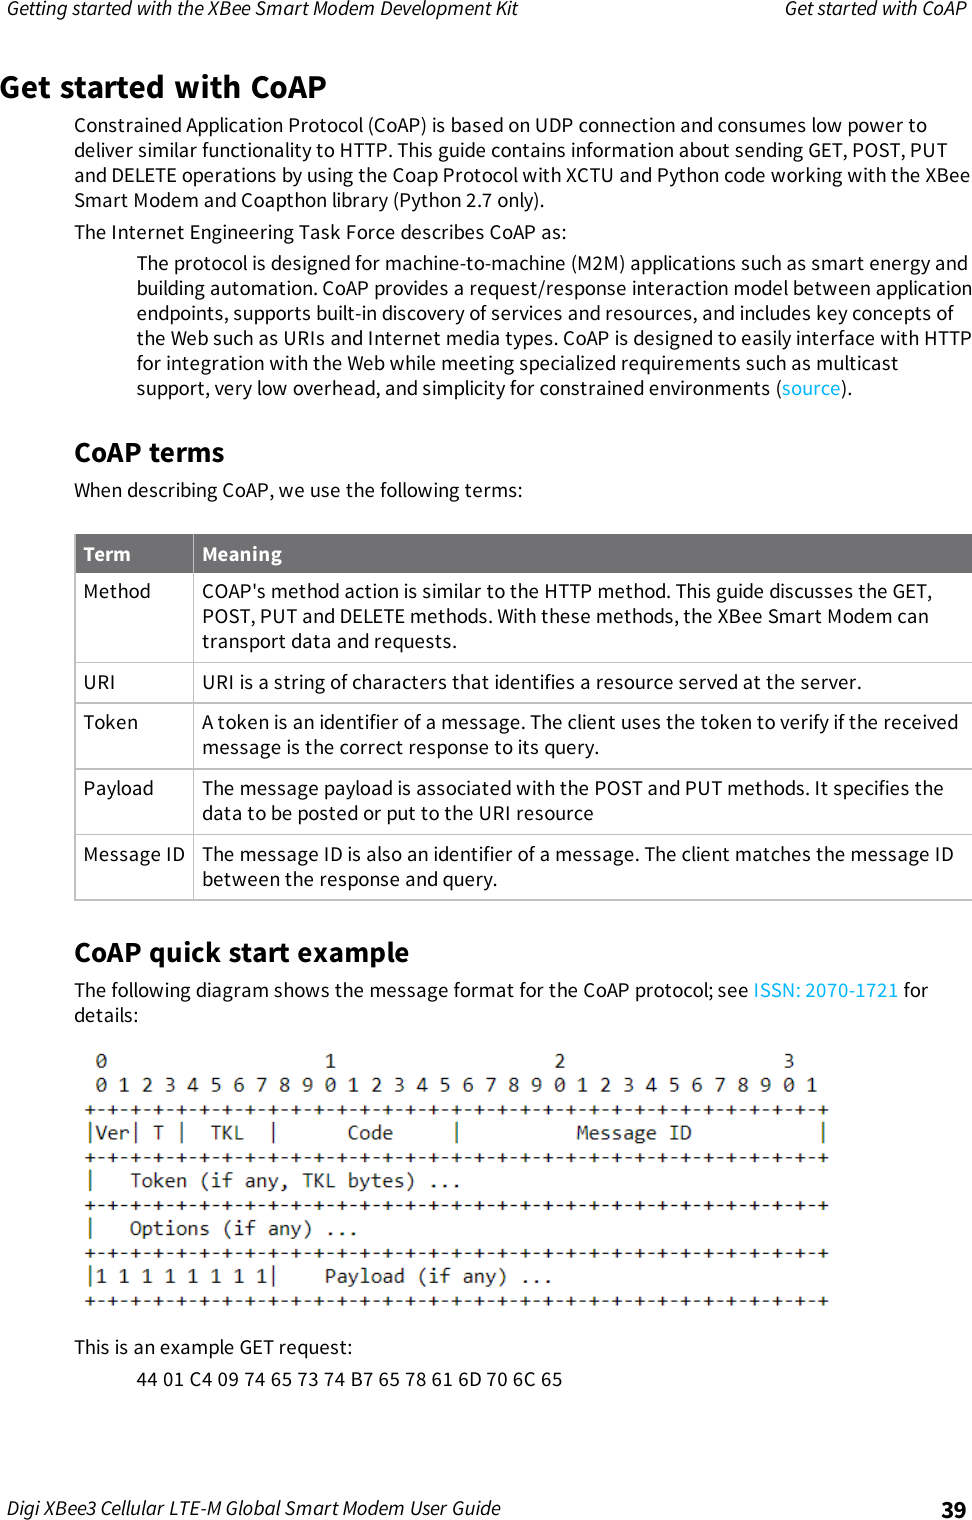 Page 39 of Digi XB3M1 XBee3 Cellular LTE-M User Manual 